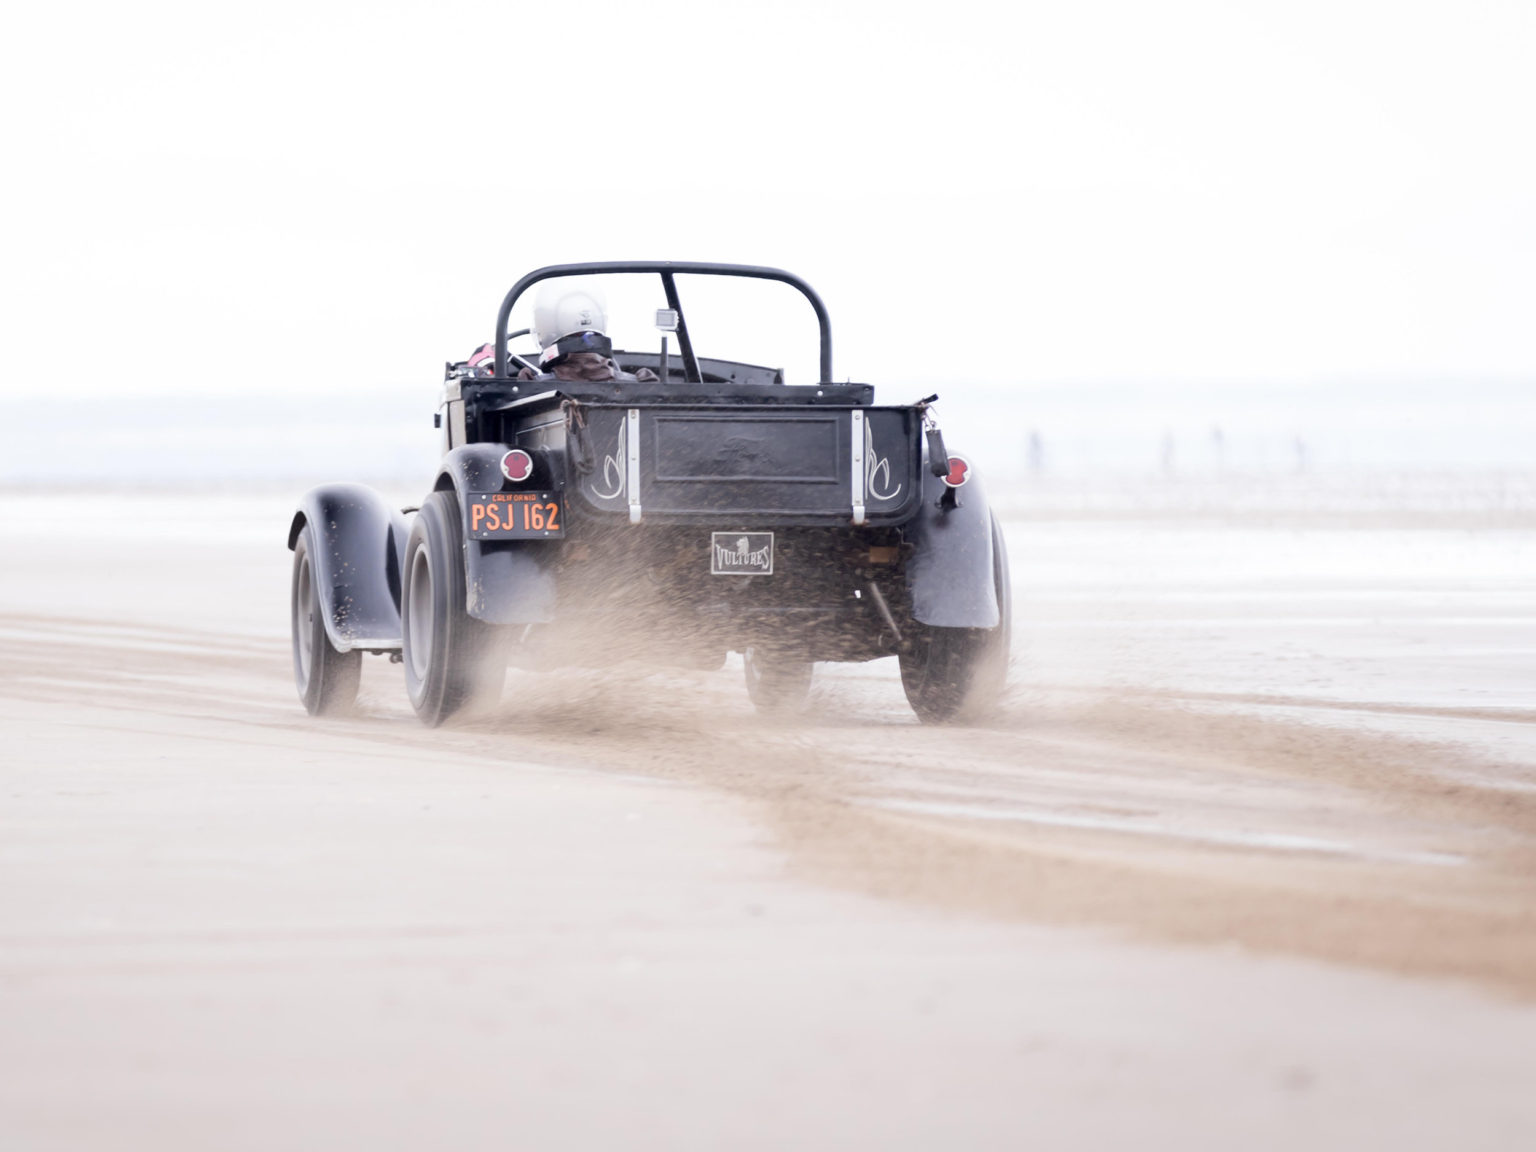 This 1929 Ford Model A is driven by Matt Ferrant on the beach ahead of the annual London Concours and Pendine Sands Hot Rod Races.